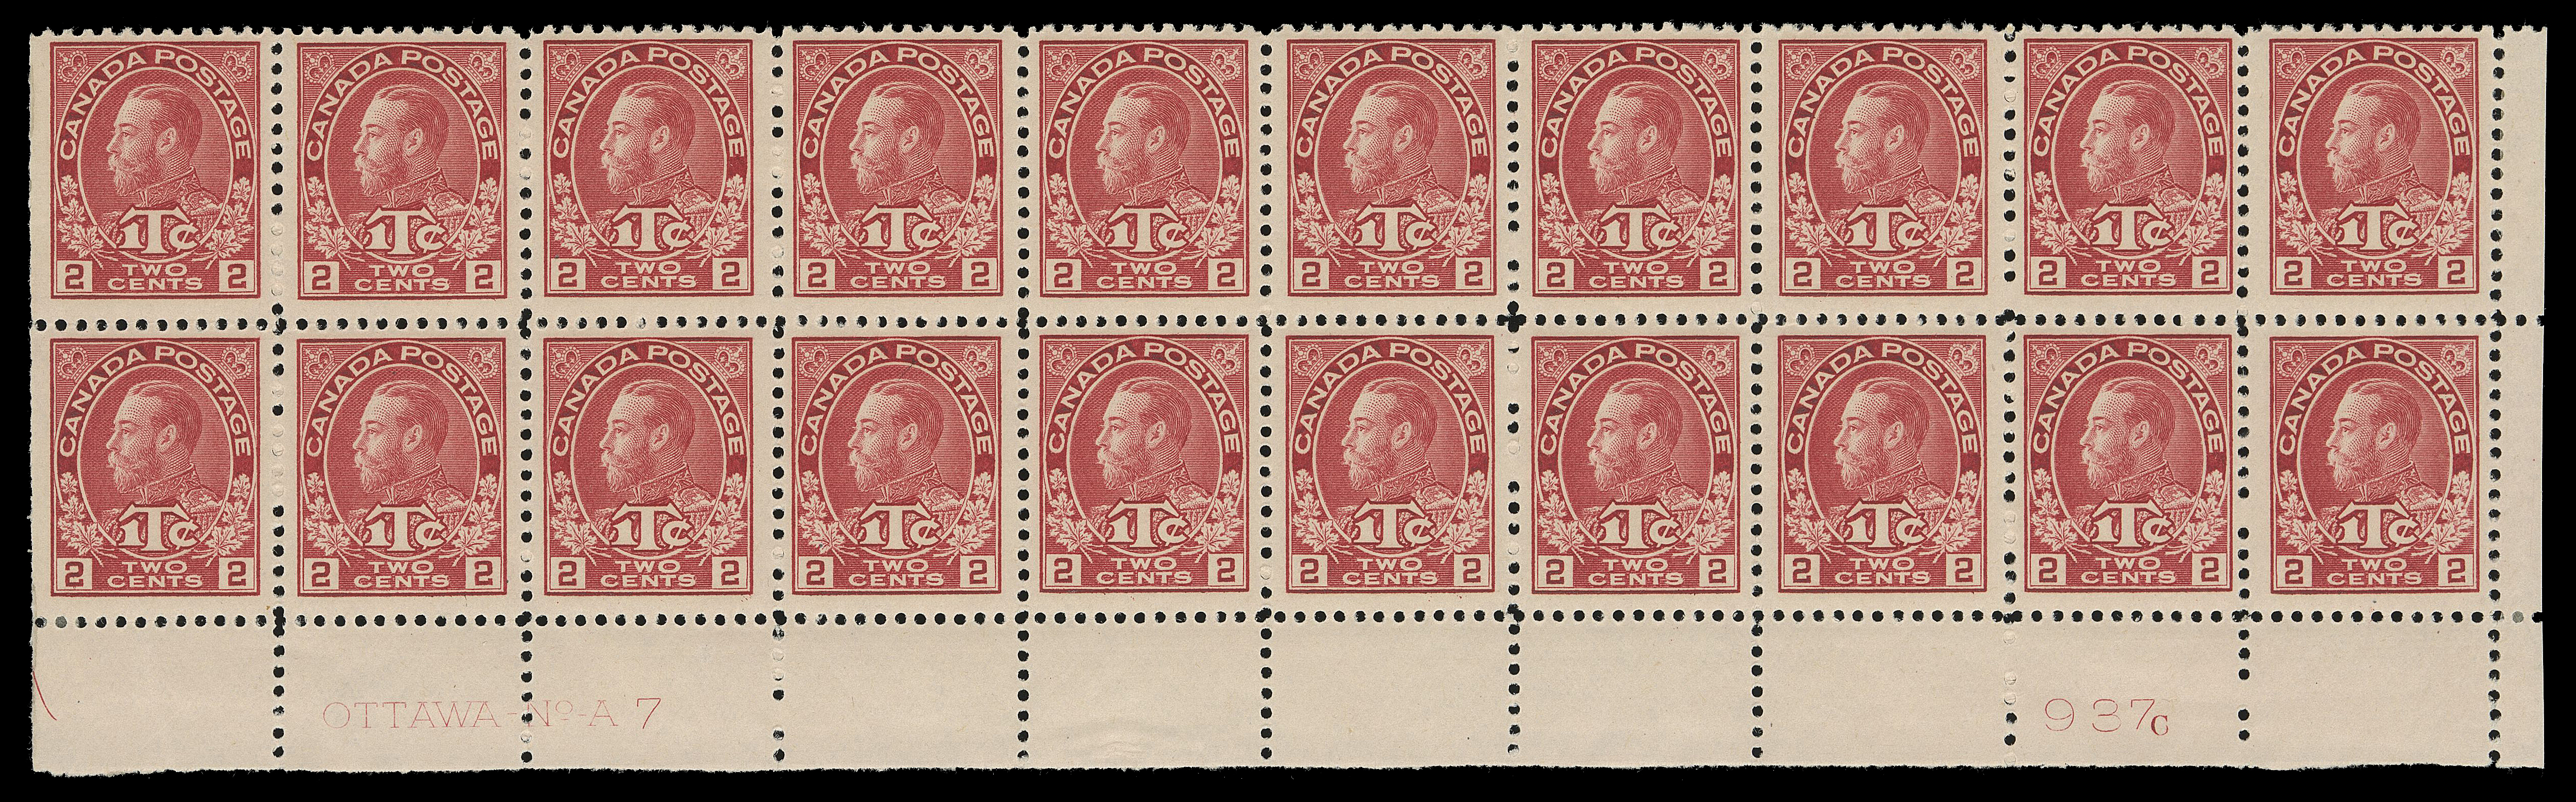 ADMIRAL STAMPS  MR3,Lower right Plate 7 block of twenty with printing order number "937C" at right, in a lovely bright shade, hinged on end columns leaving sixteen stamps NH, F-VF and very scarce. (Unitrade cat. $1,830)